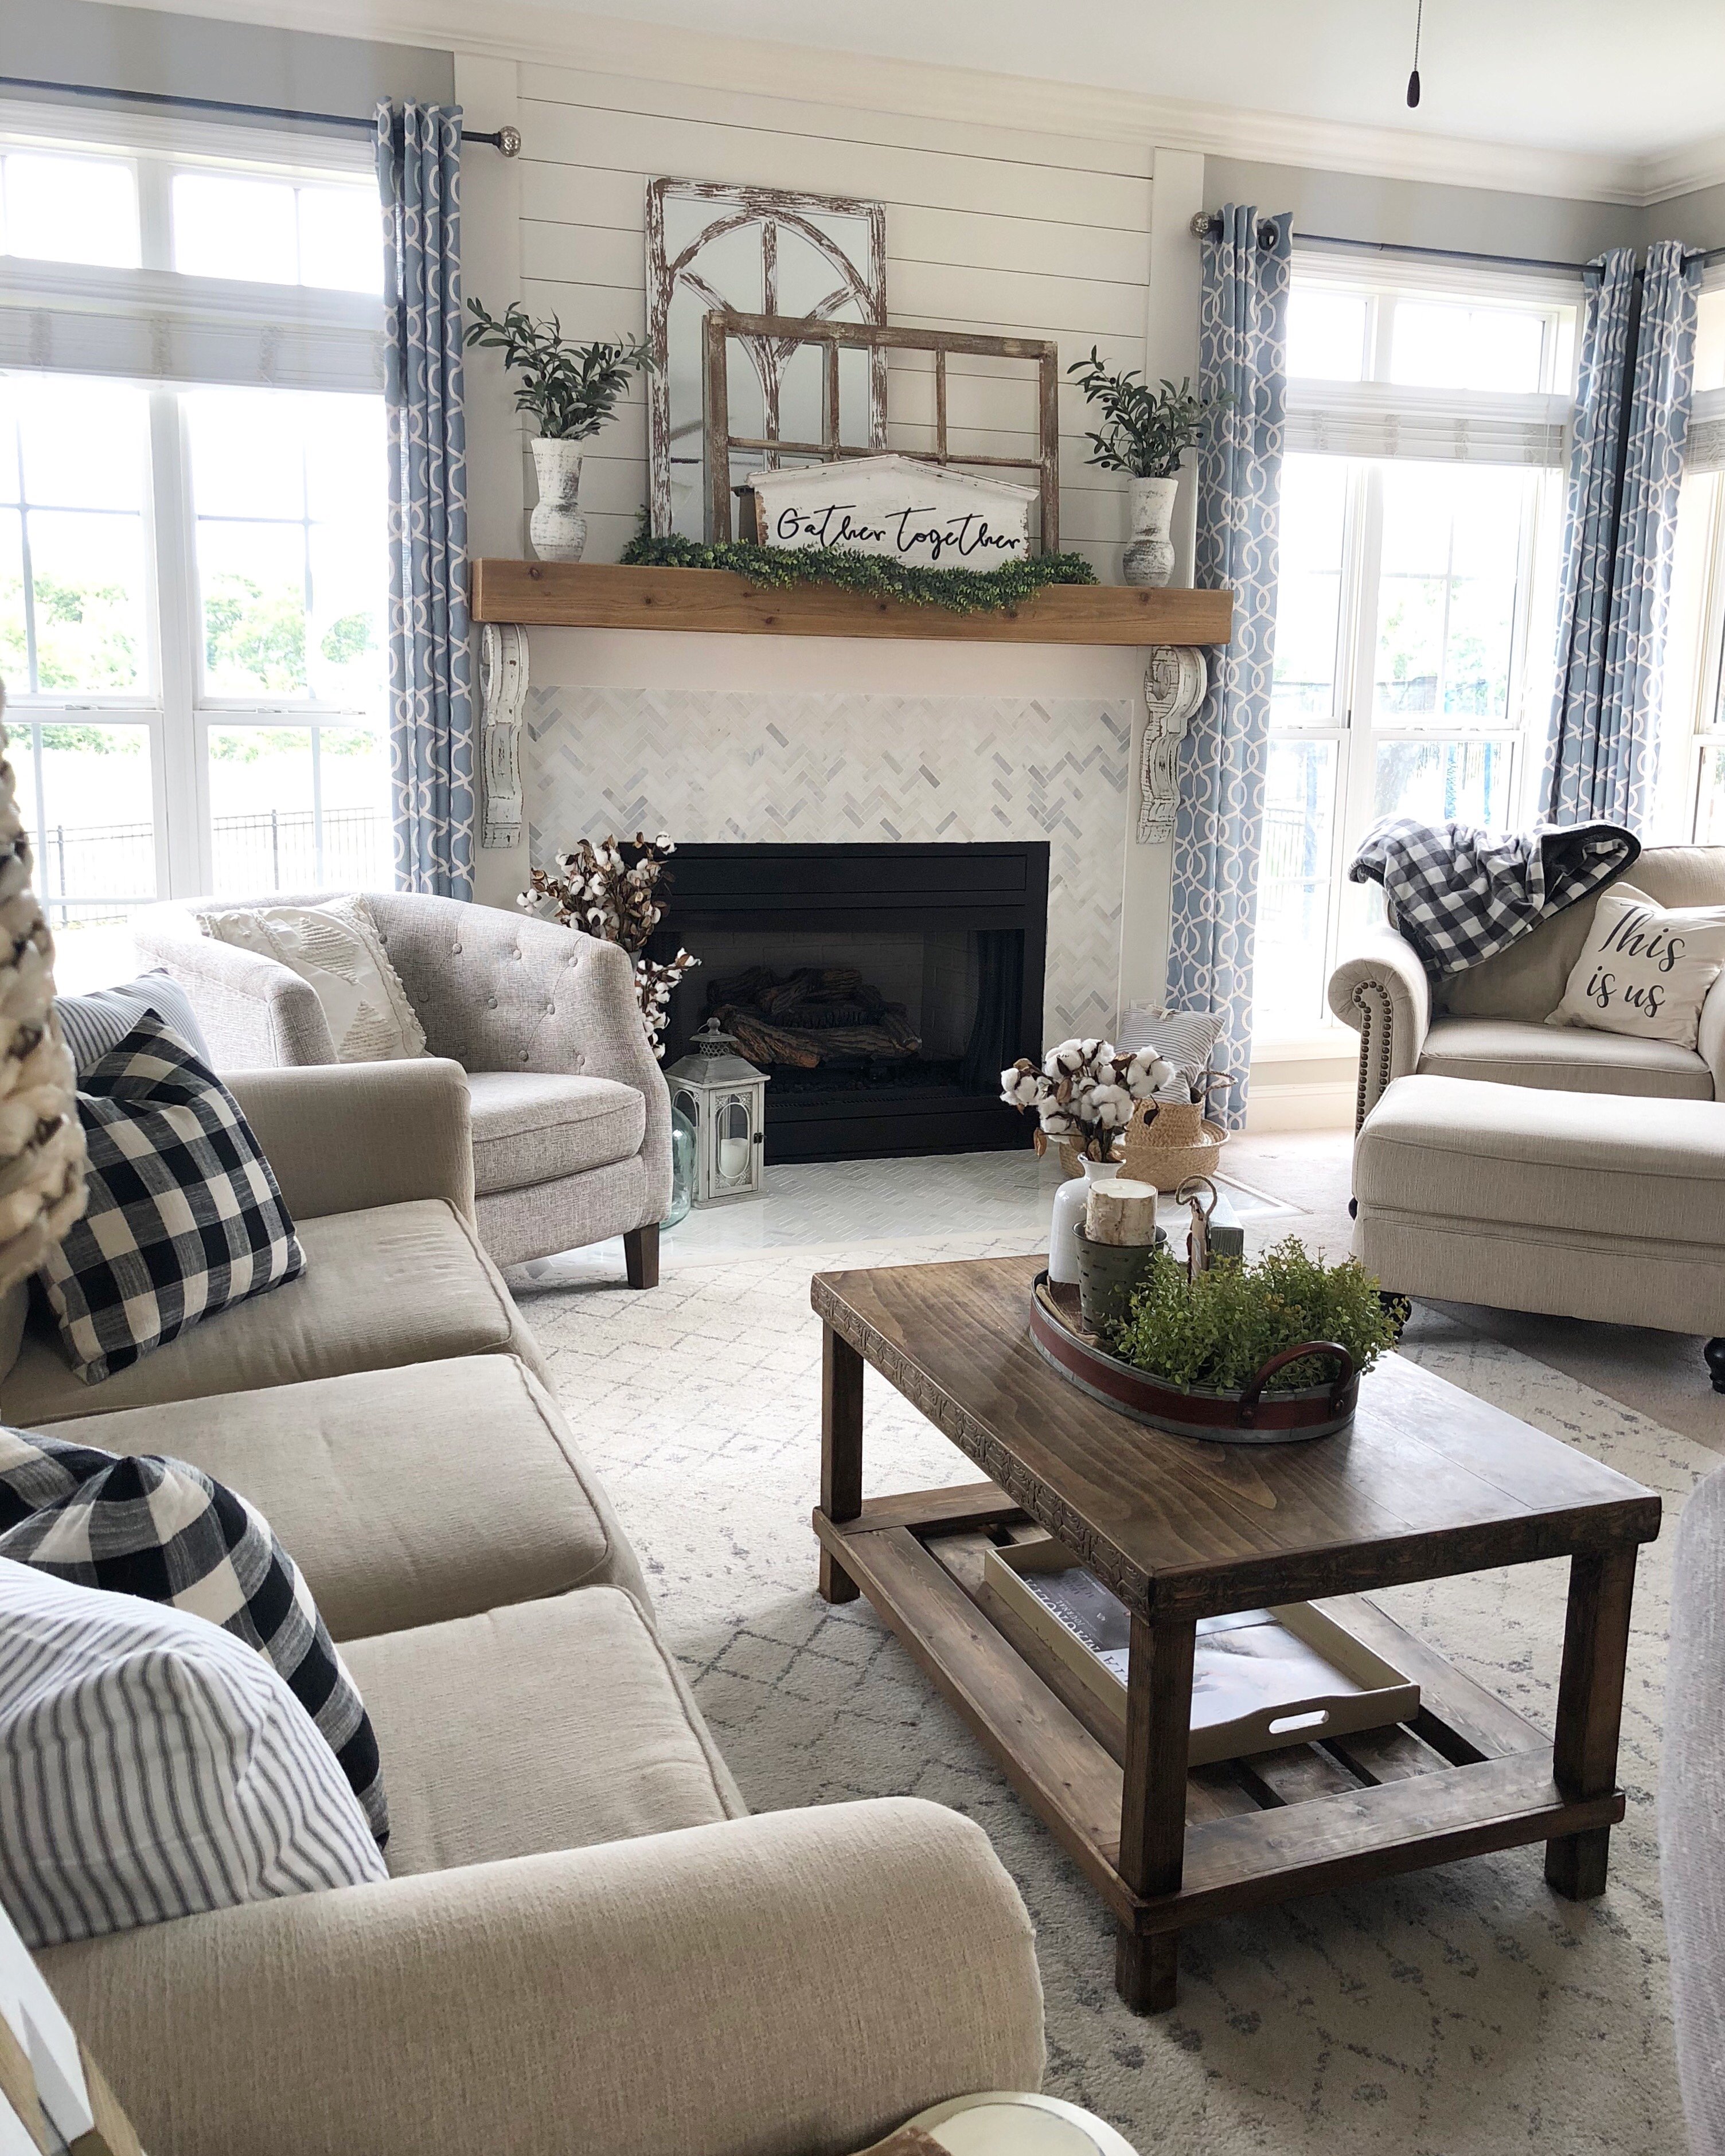 how to transition your decor from summer to a more neutralized look to get ready for Fall!